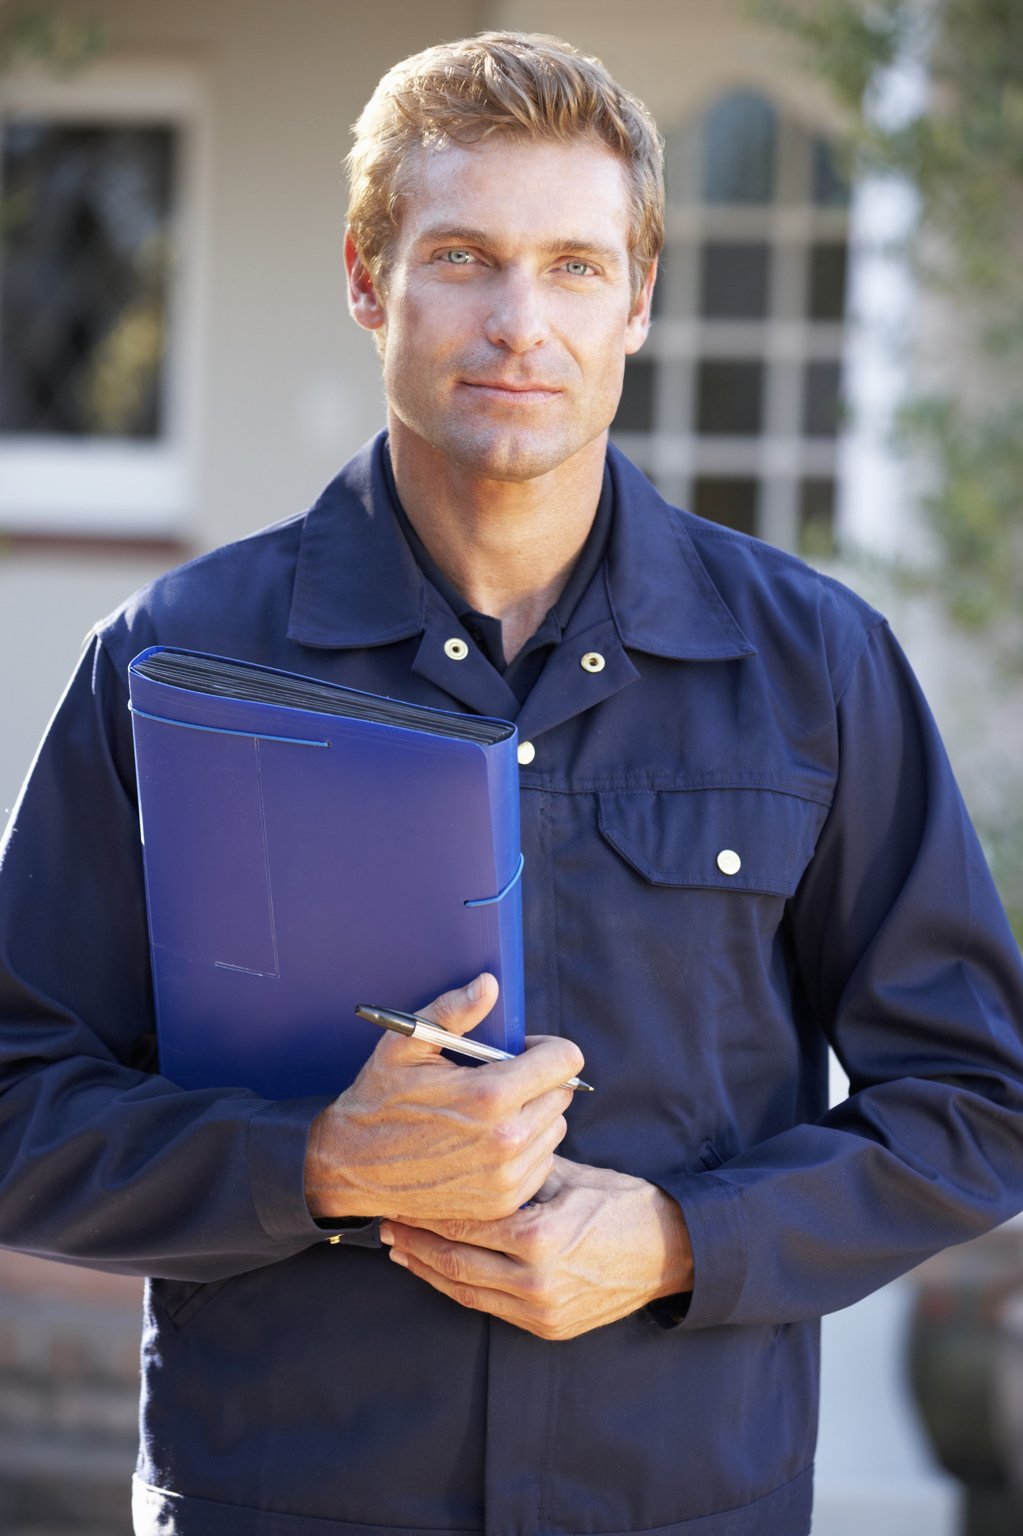 Types of Property Inspections, and How to Conduct Them